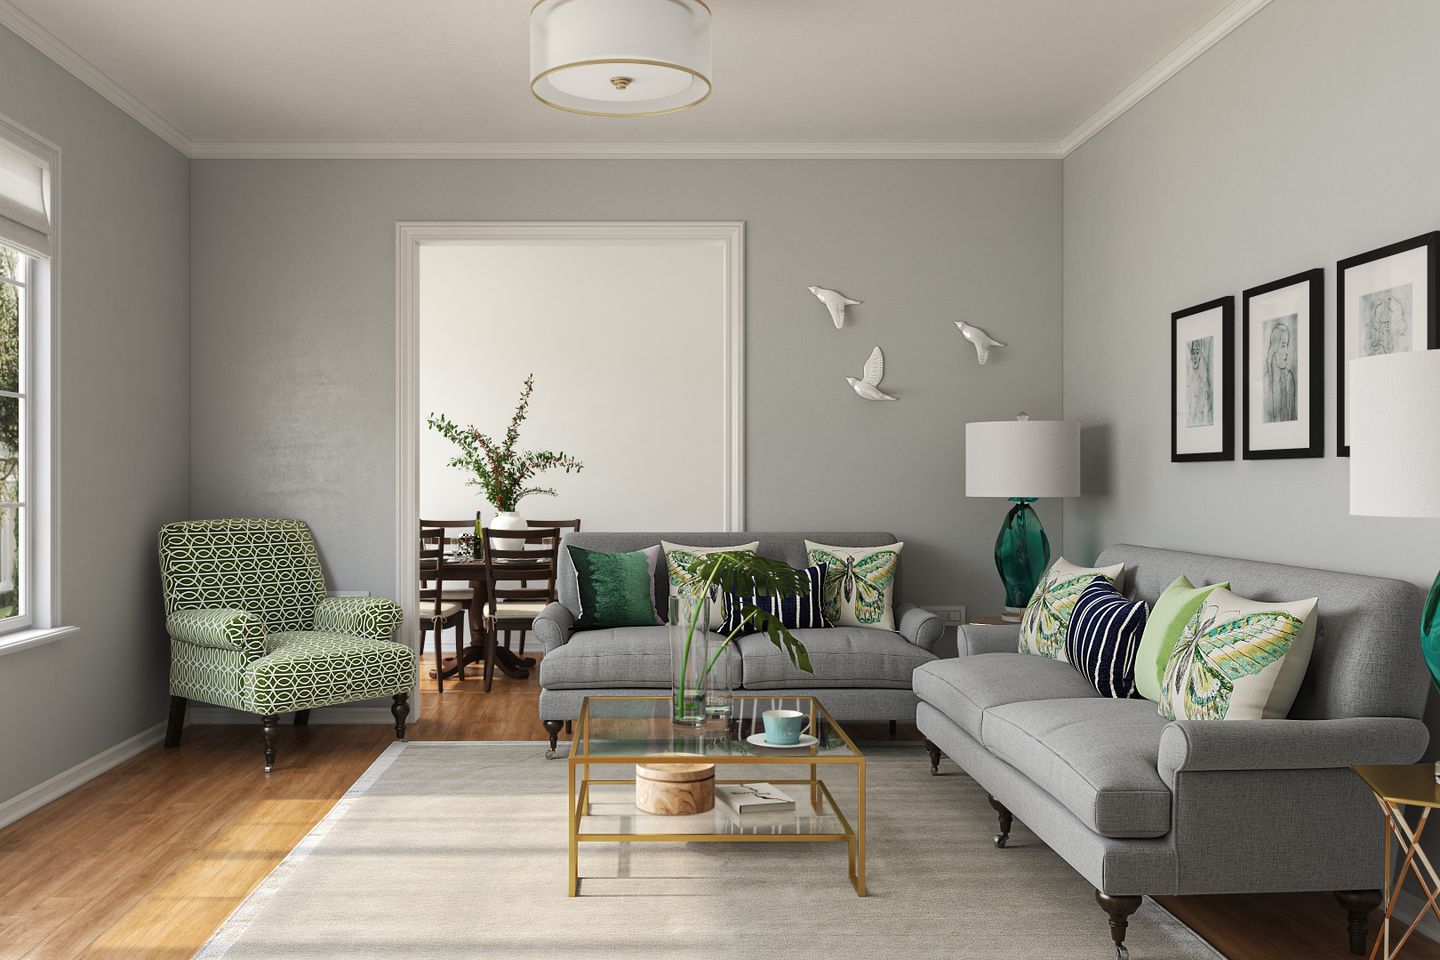 Contemporary Grey Themed Living Room With Green Accents Livspace